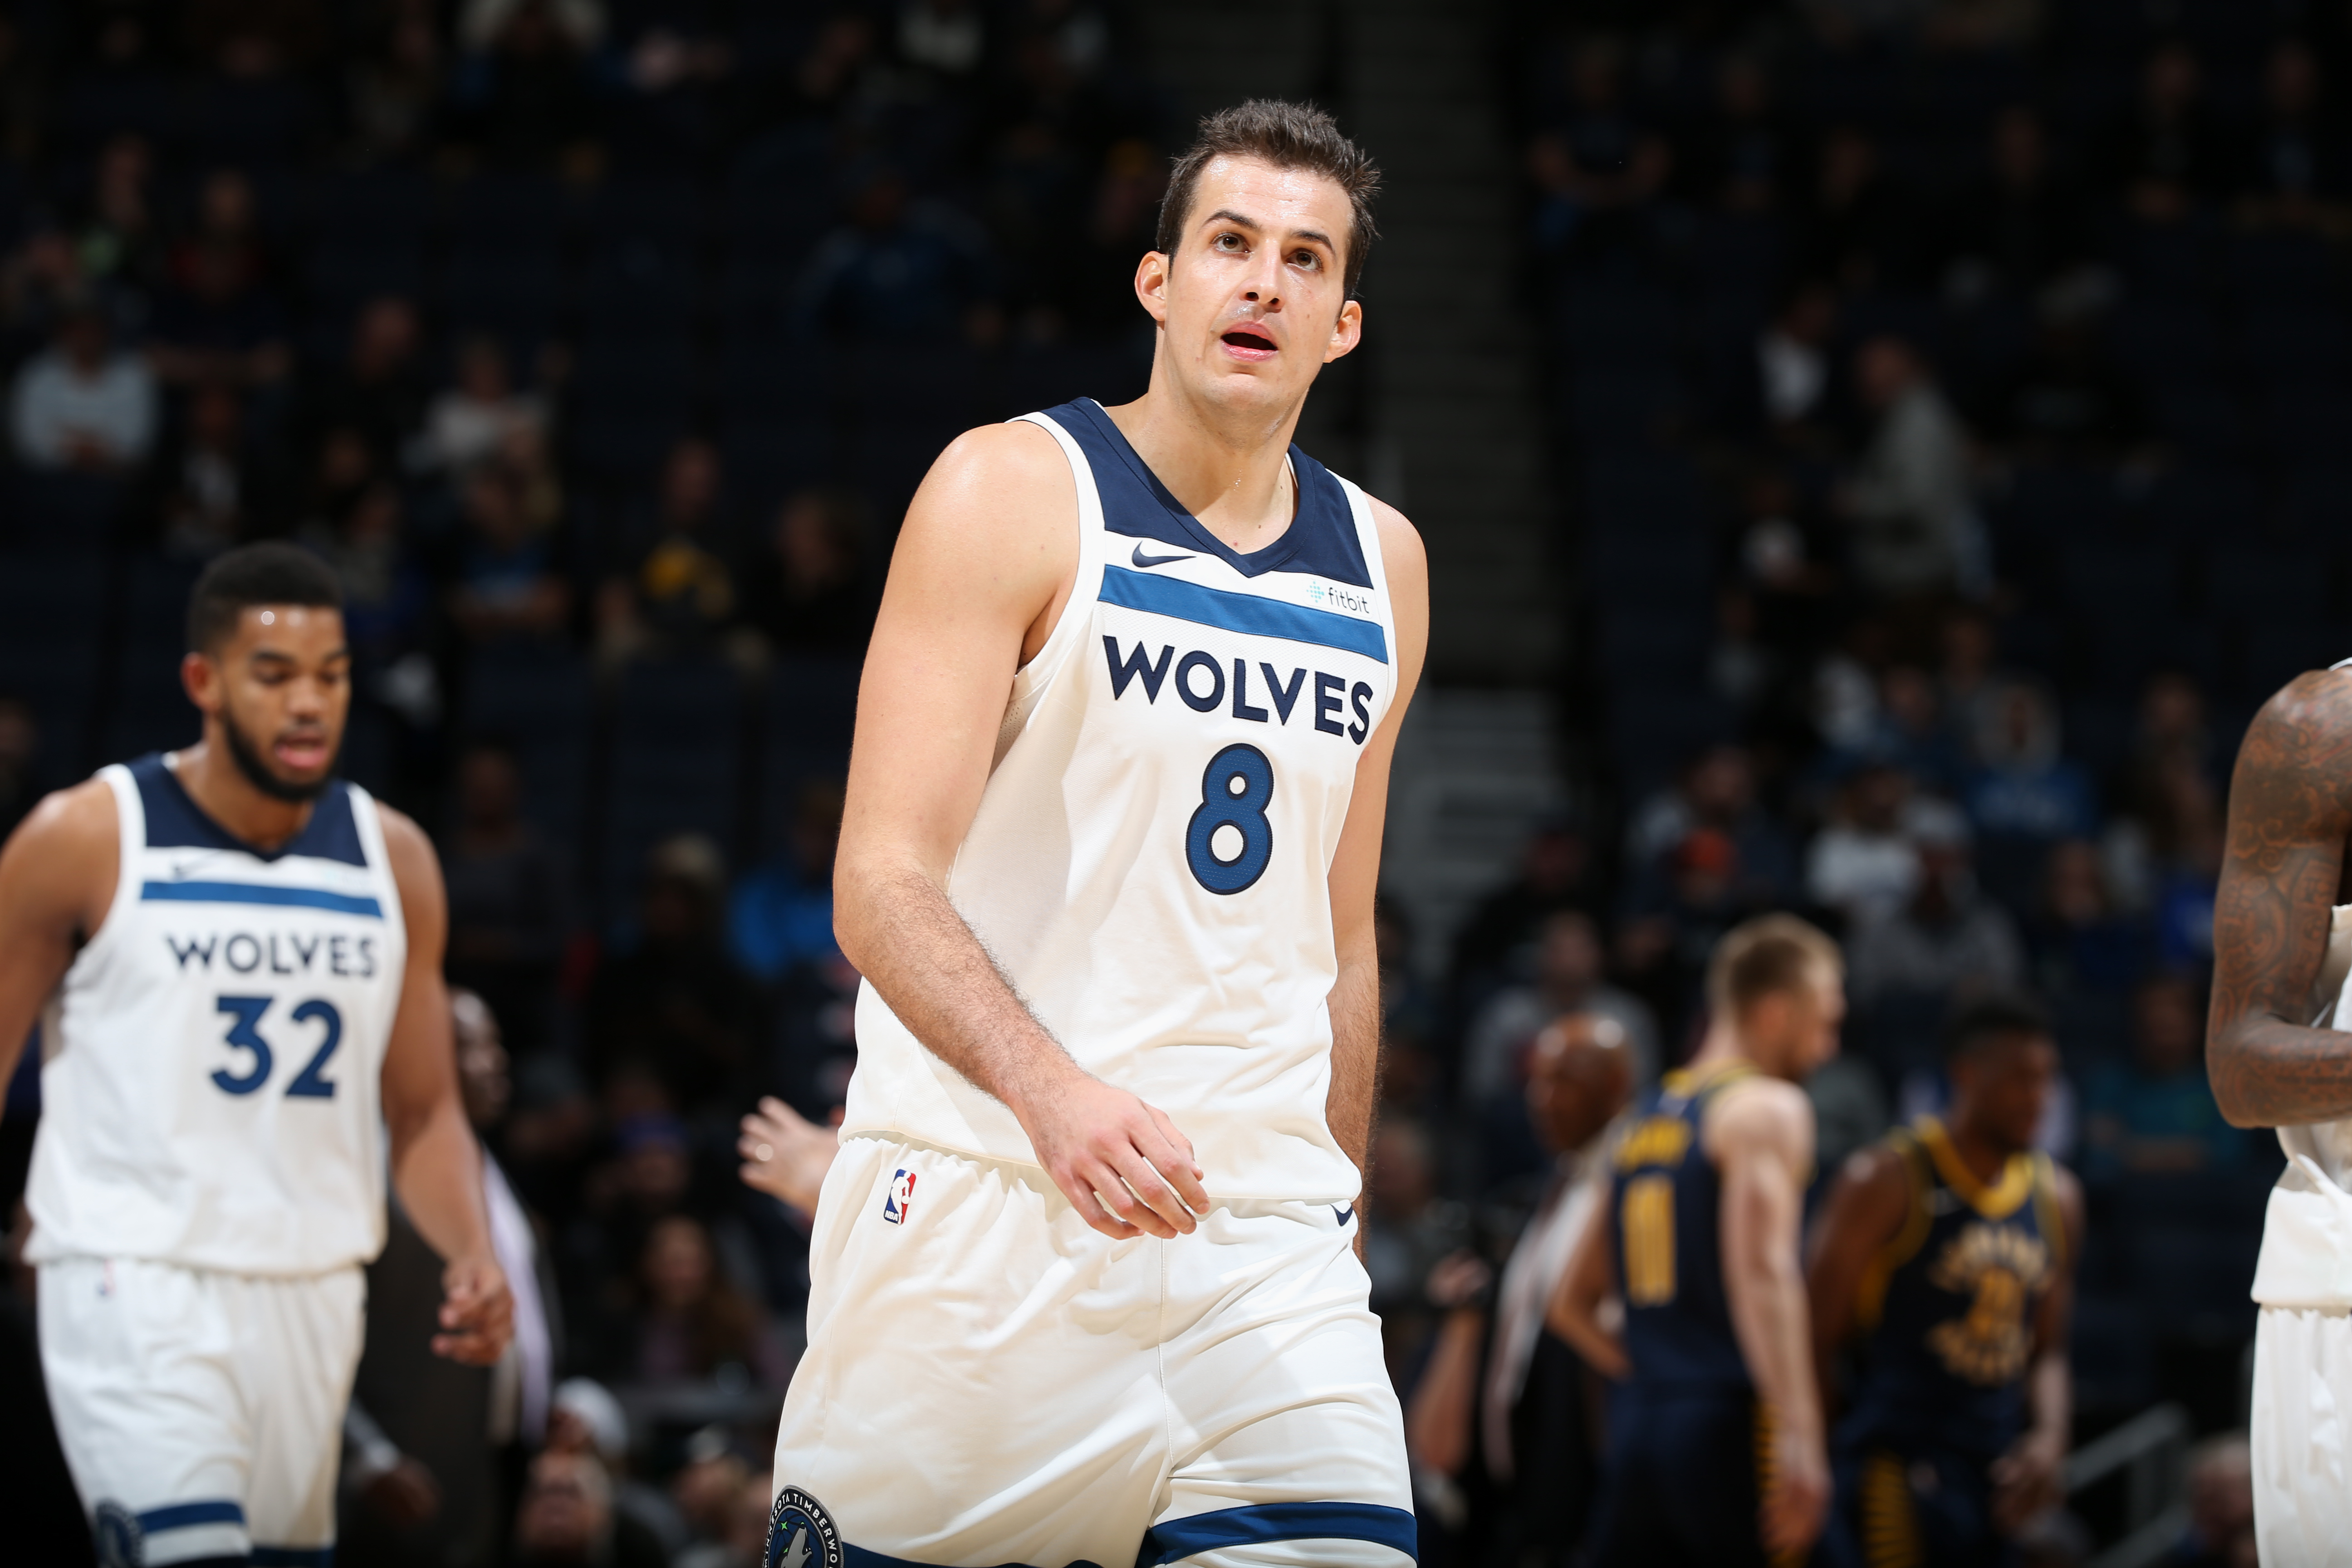 Wolves' way now clear to sign EuroLeague star Nemanja Bjelica